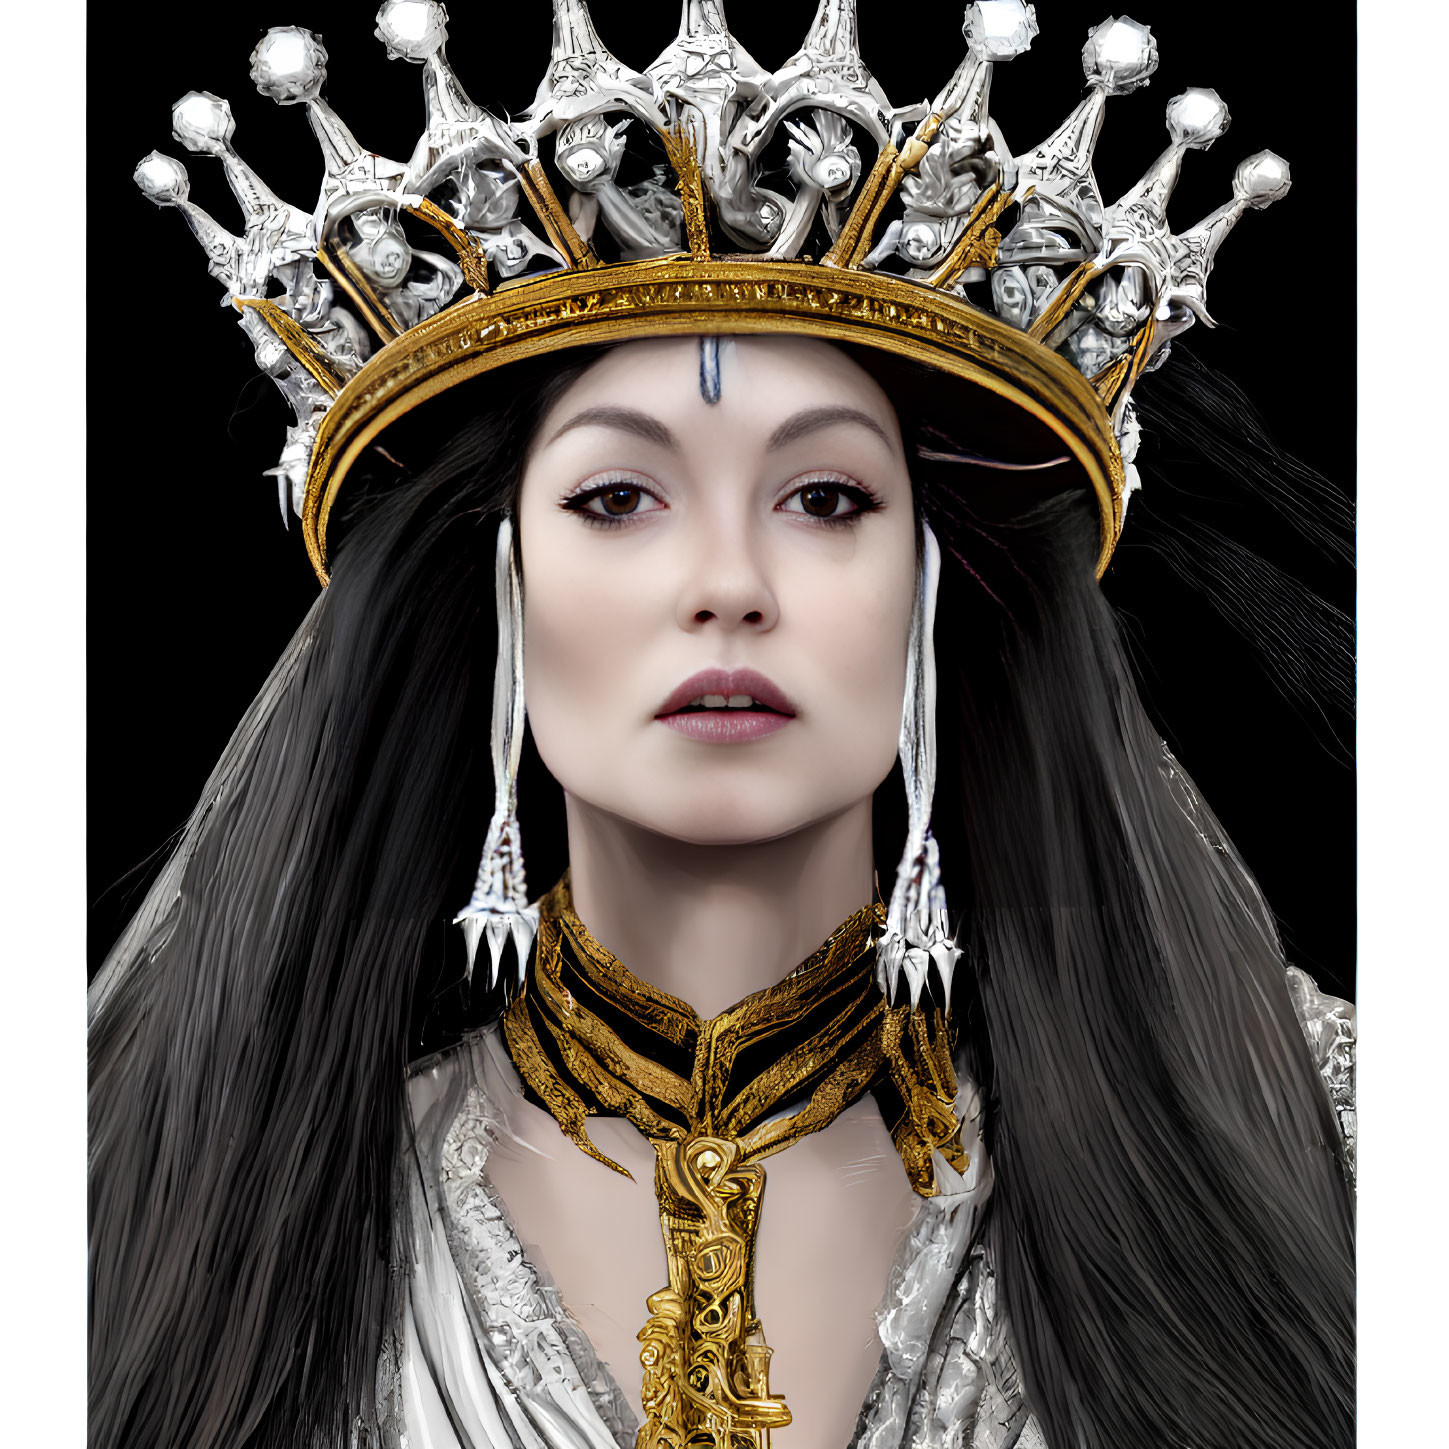 Dark-haired woman wearing elaborate silver and gold crown with jewels on black background